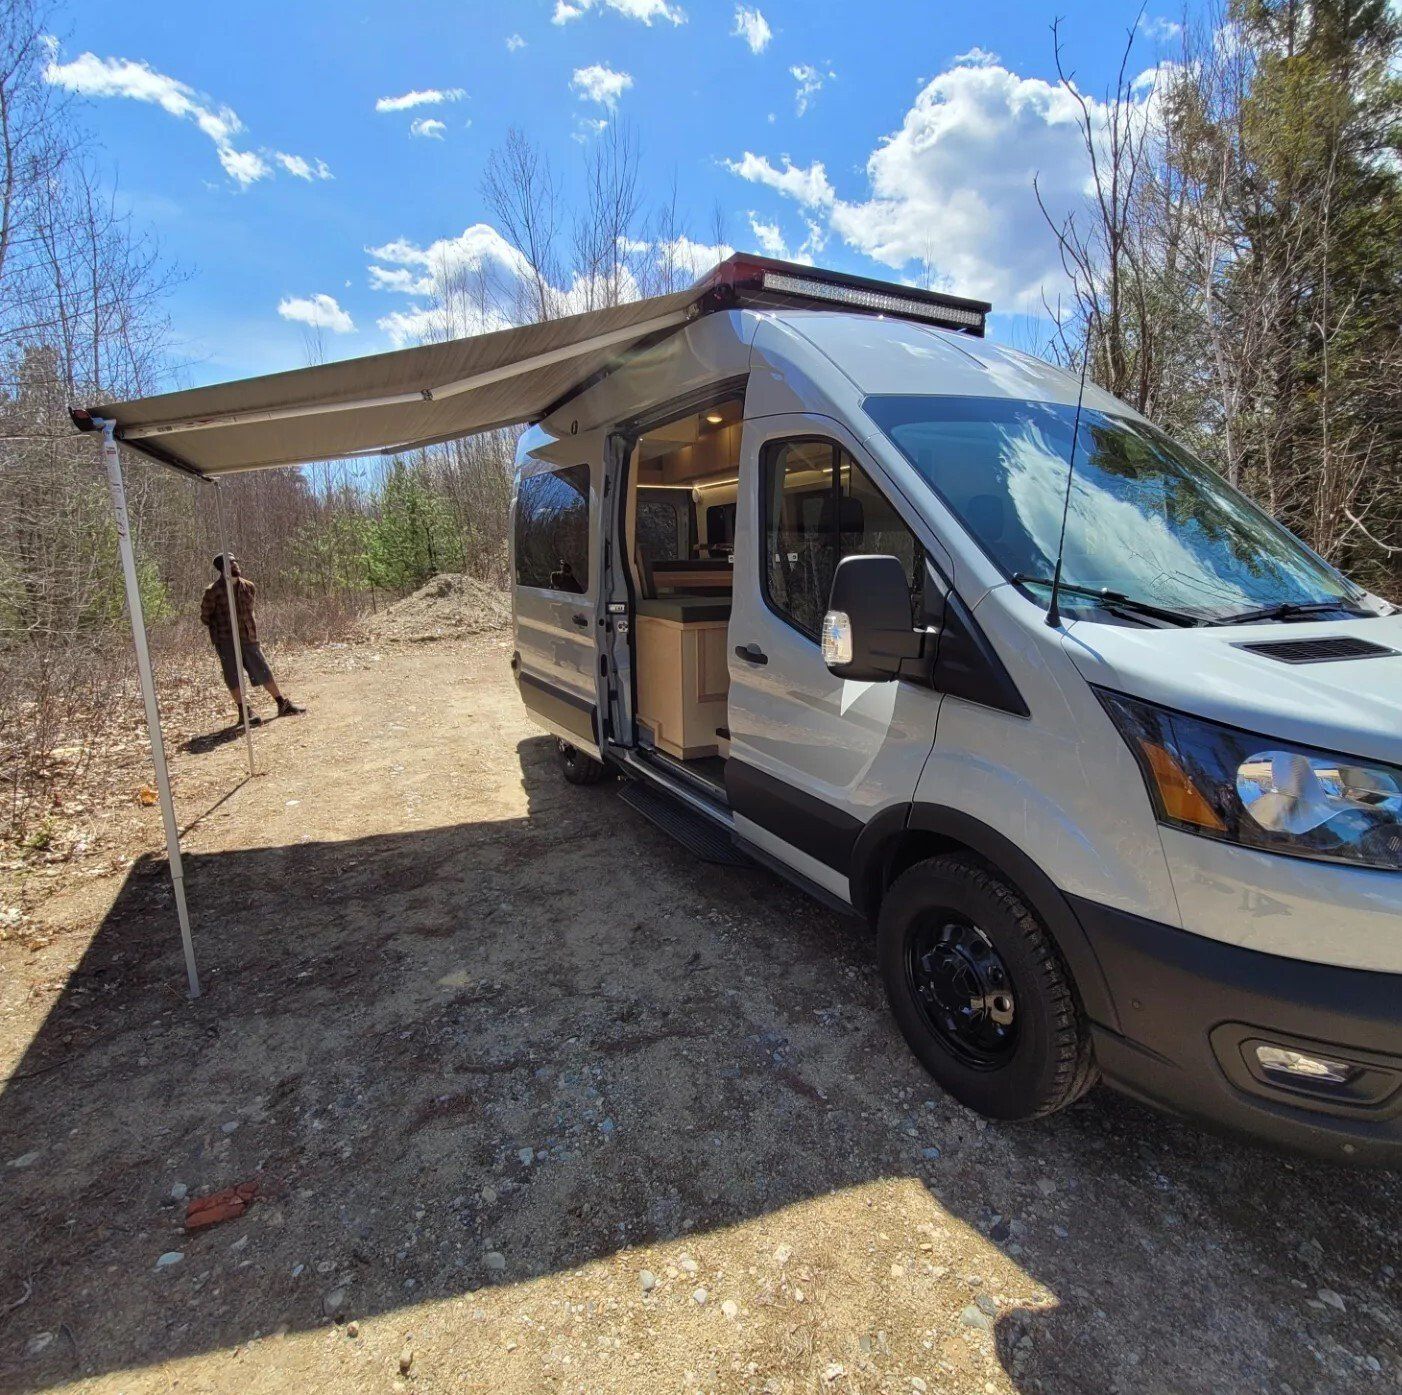 Happy Family On A Camping  - Milton, NH  - RV Service and R & L Van Builds